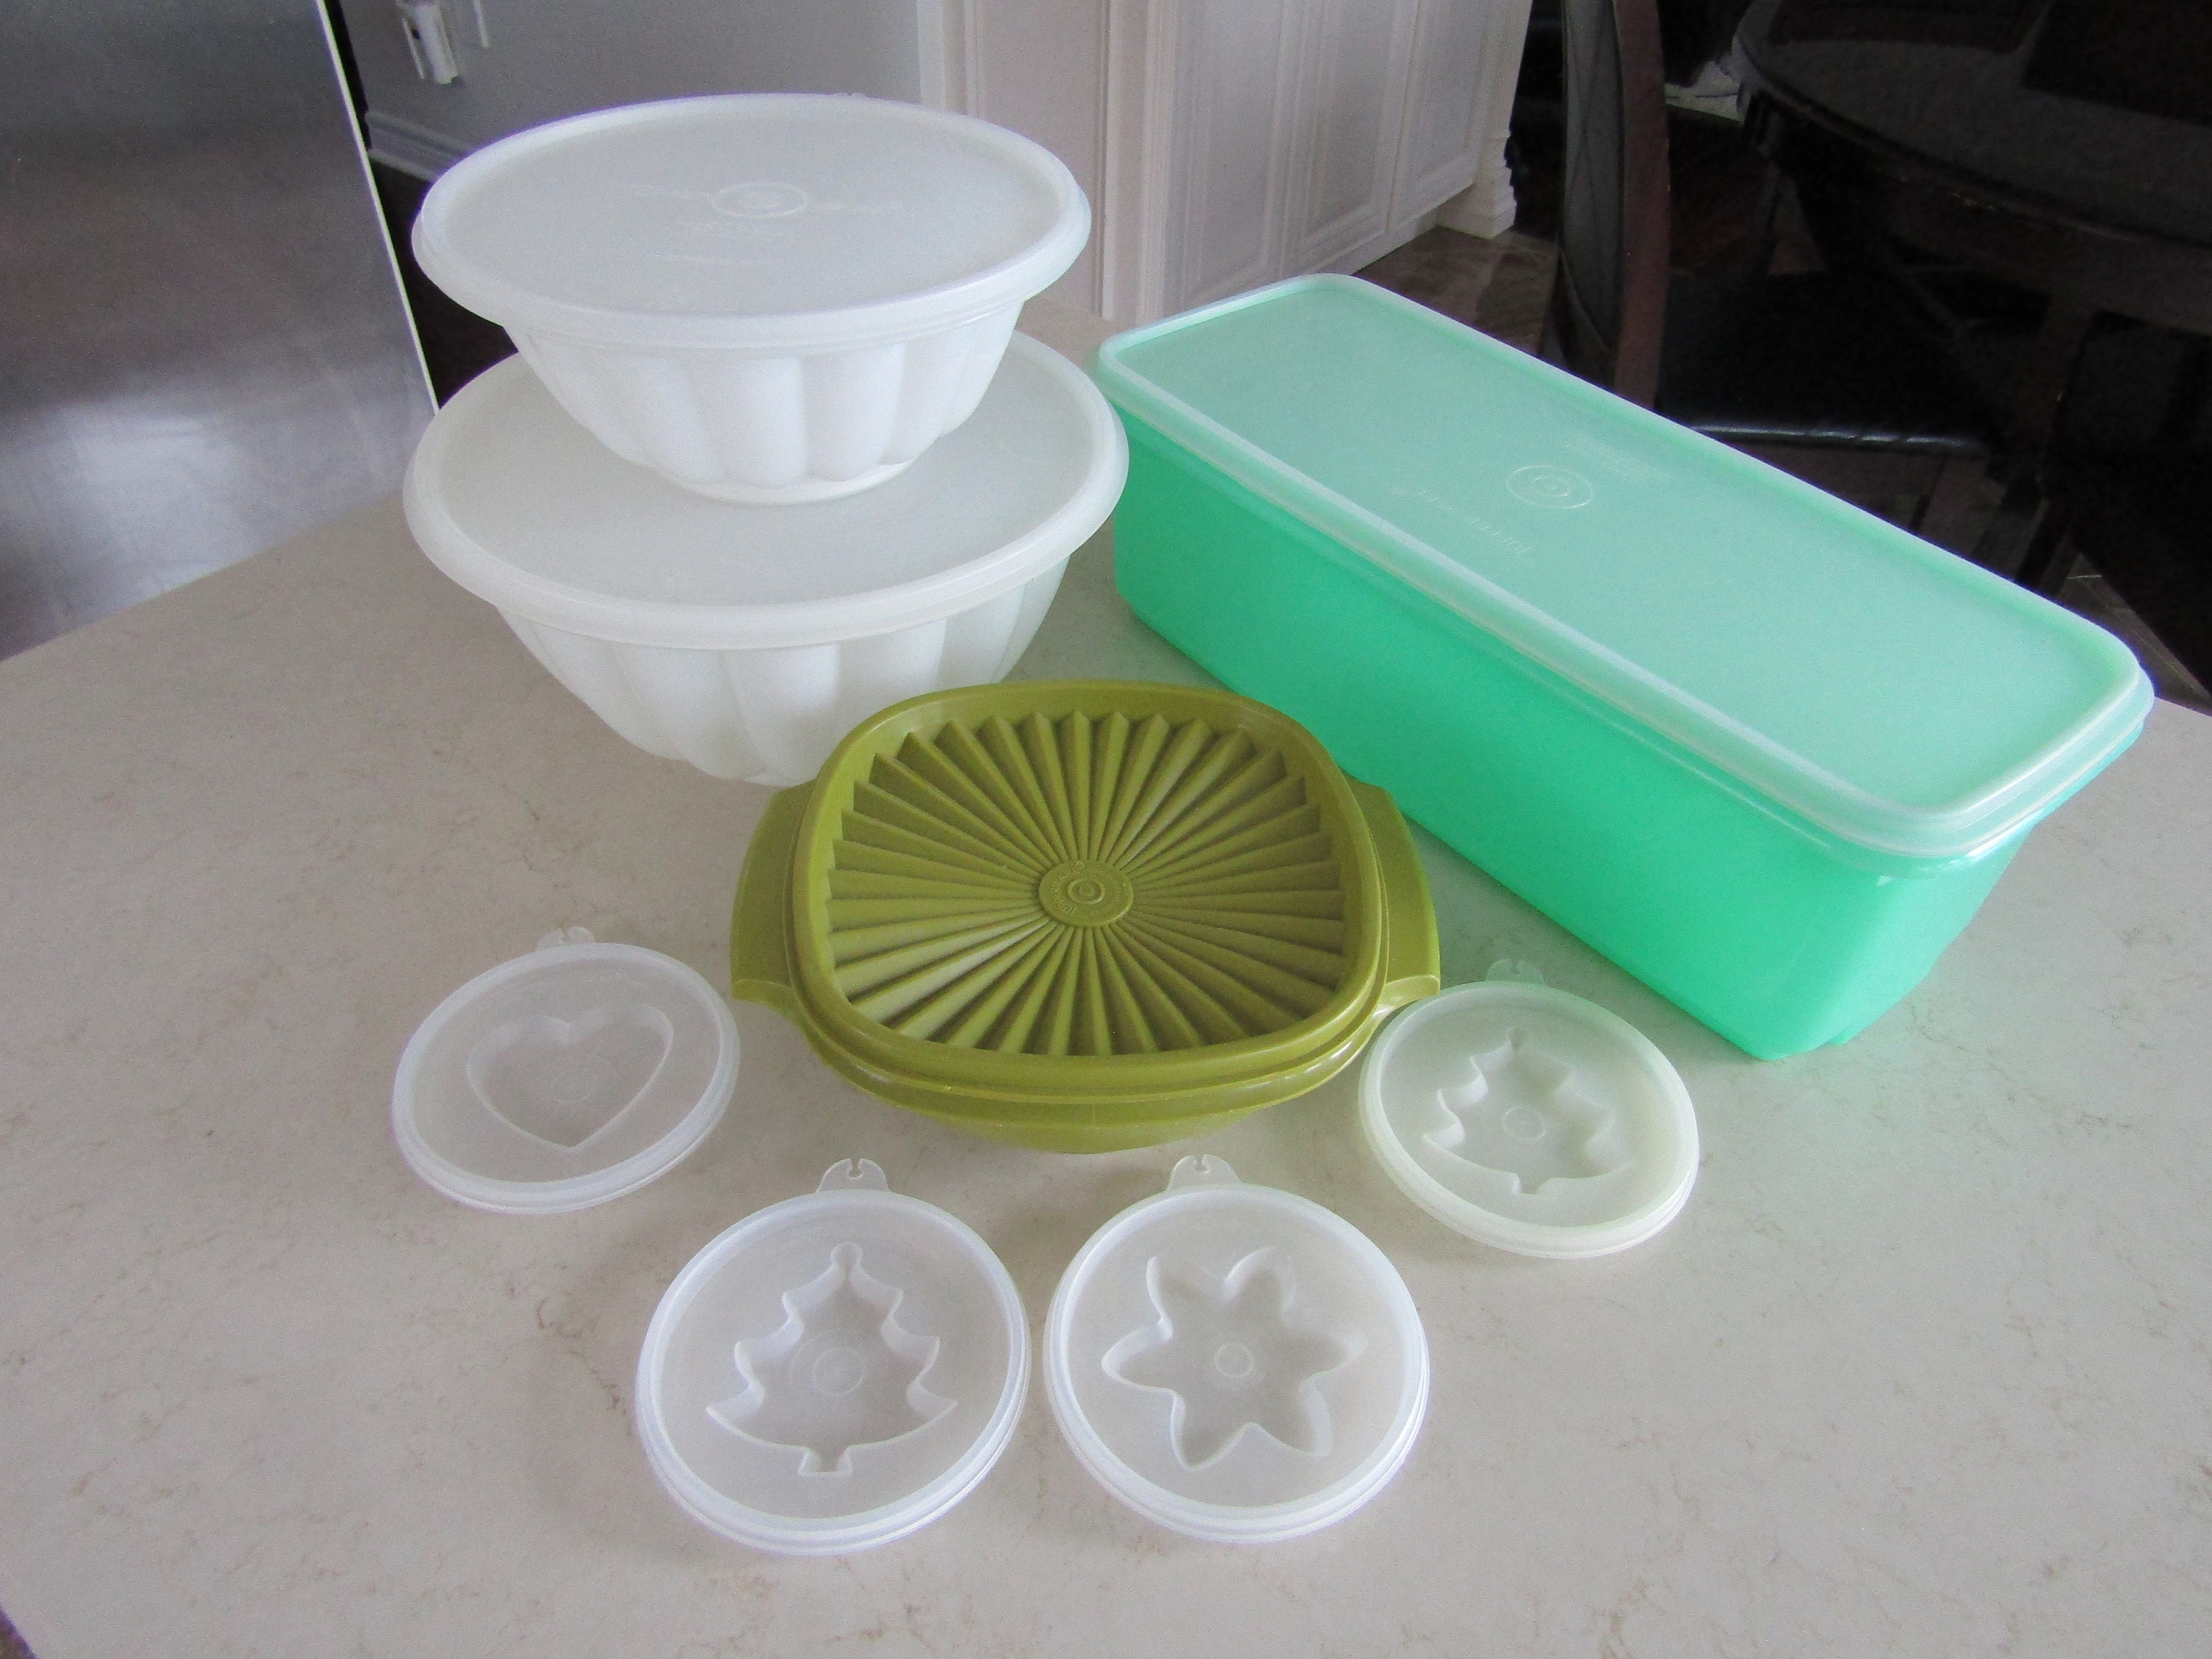 Vintage Tupperware Containers Etsy 日本